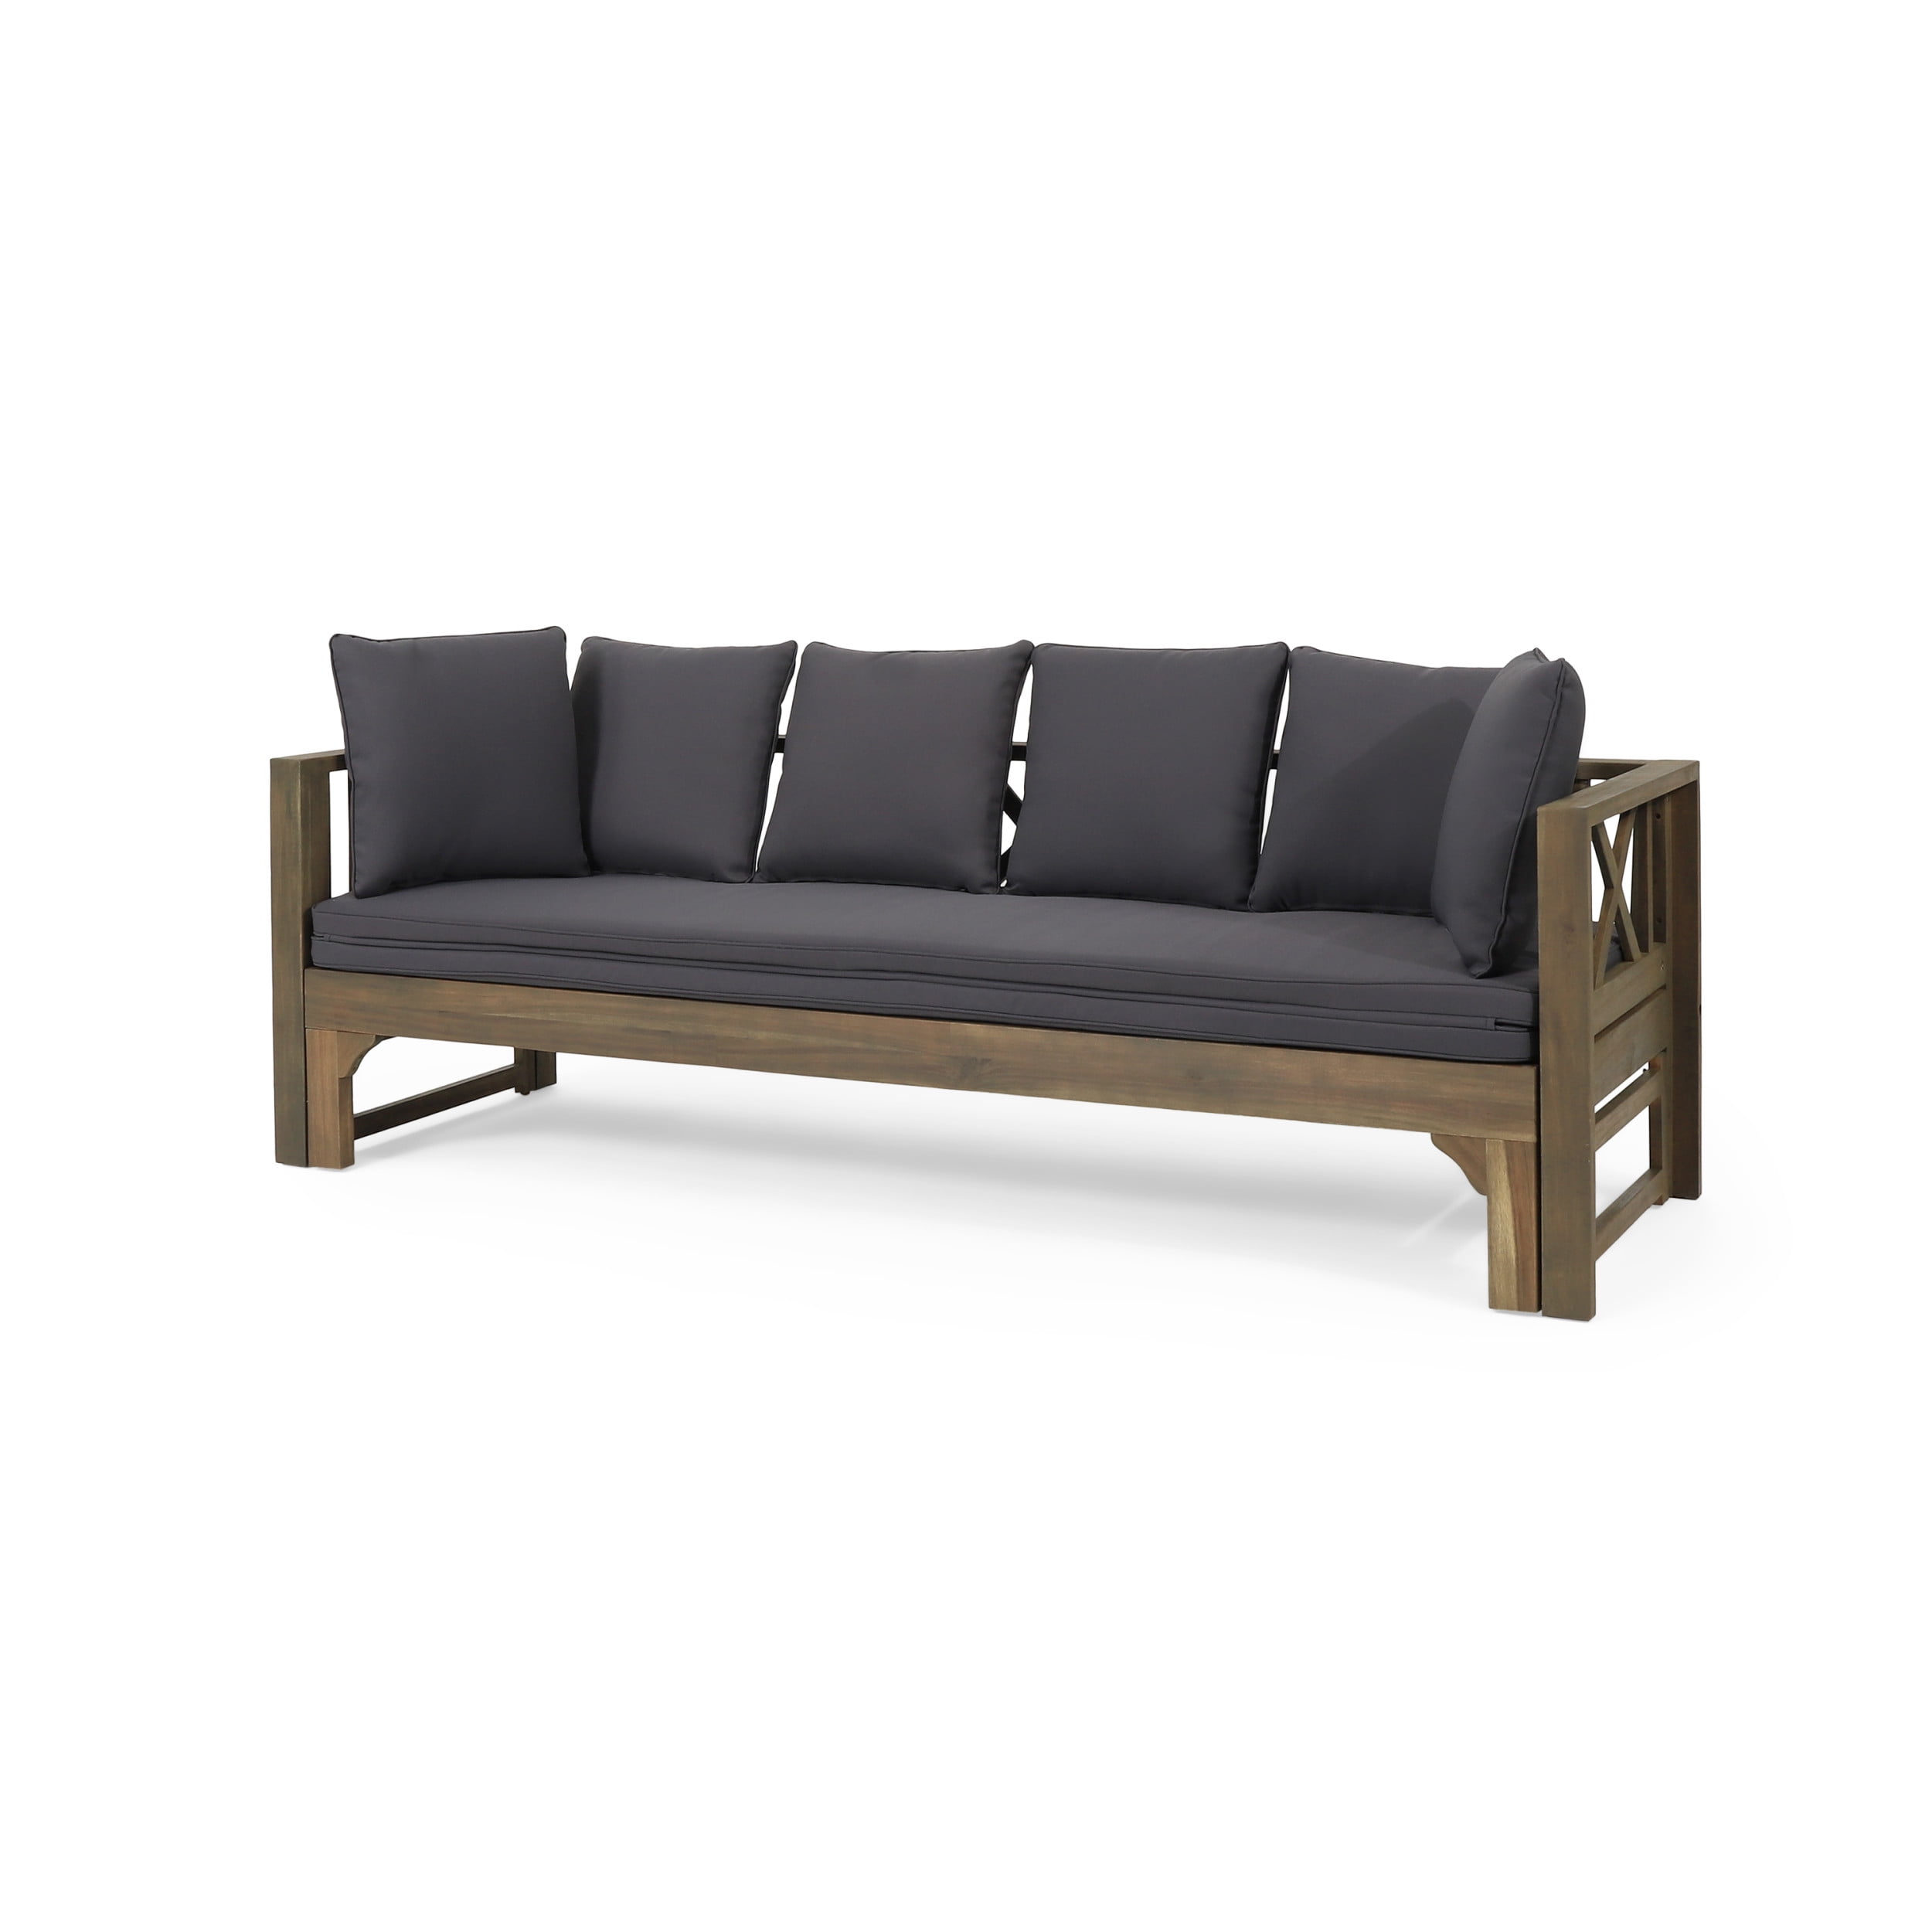 Outdoor Daybed Acacia and Wood Sofa, Camille GDF Teal Dark Studio Teak Extendable